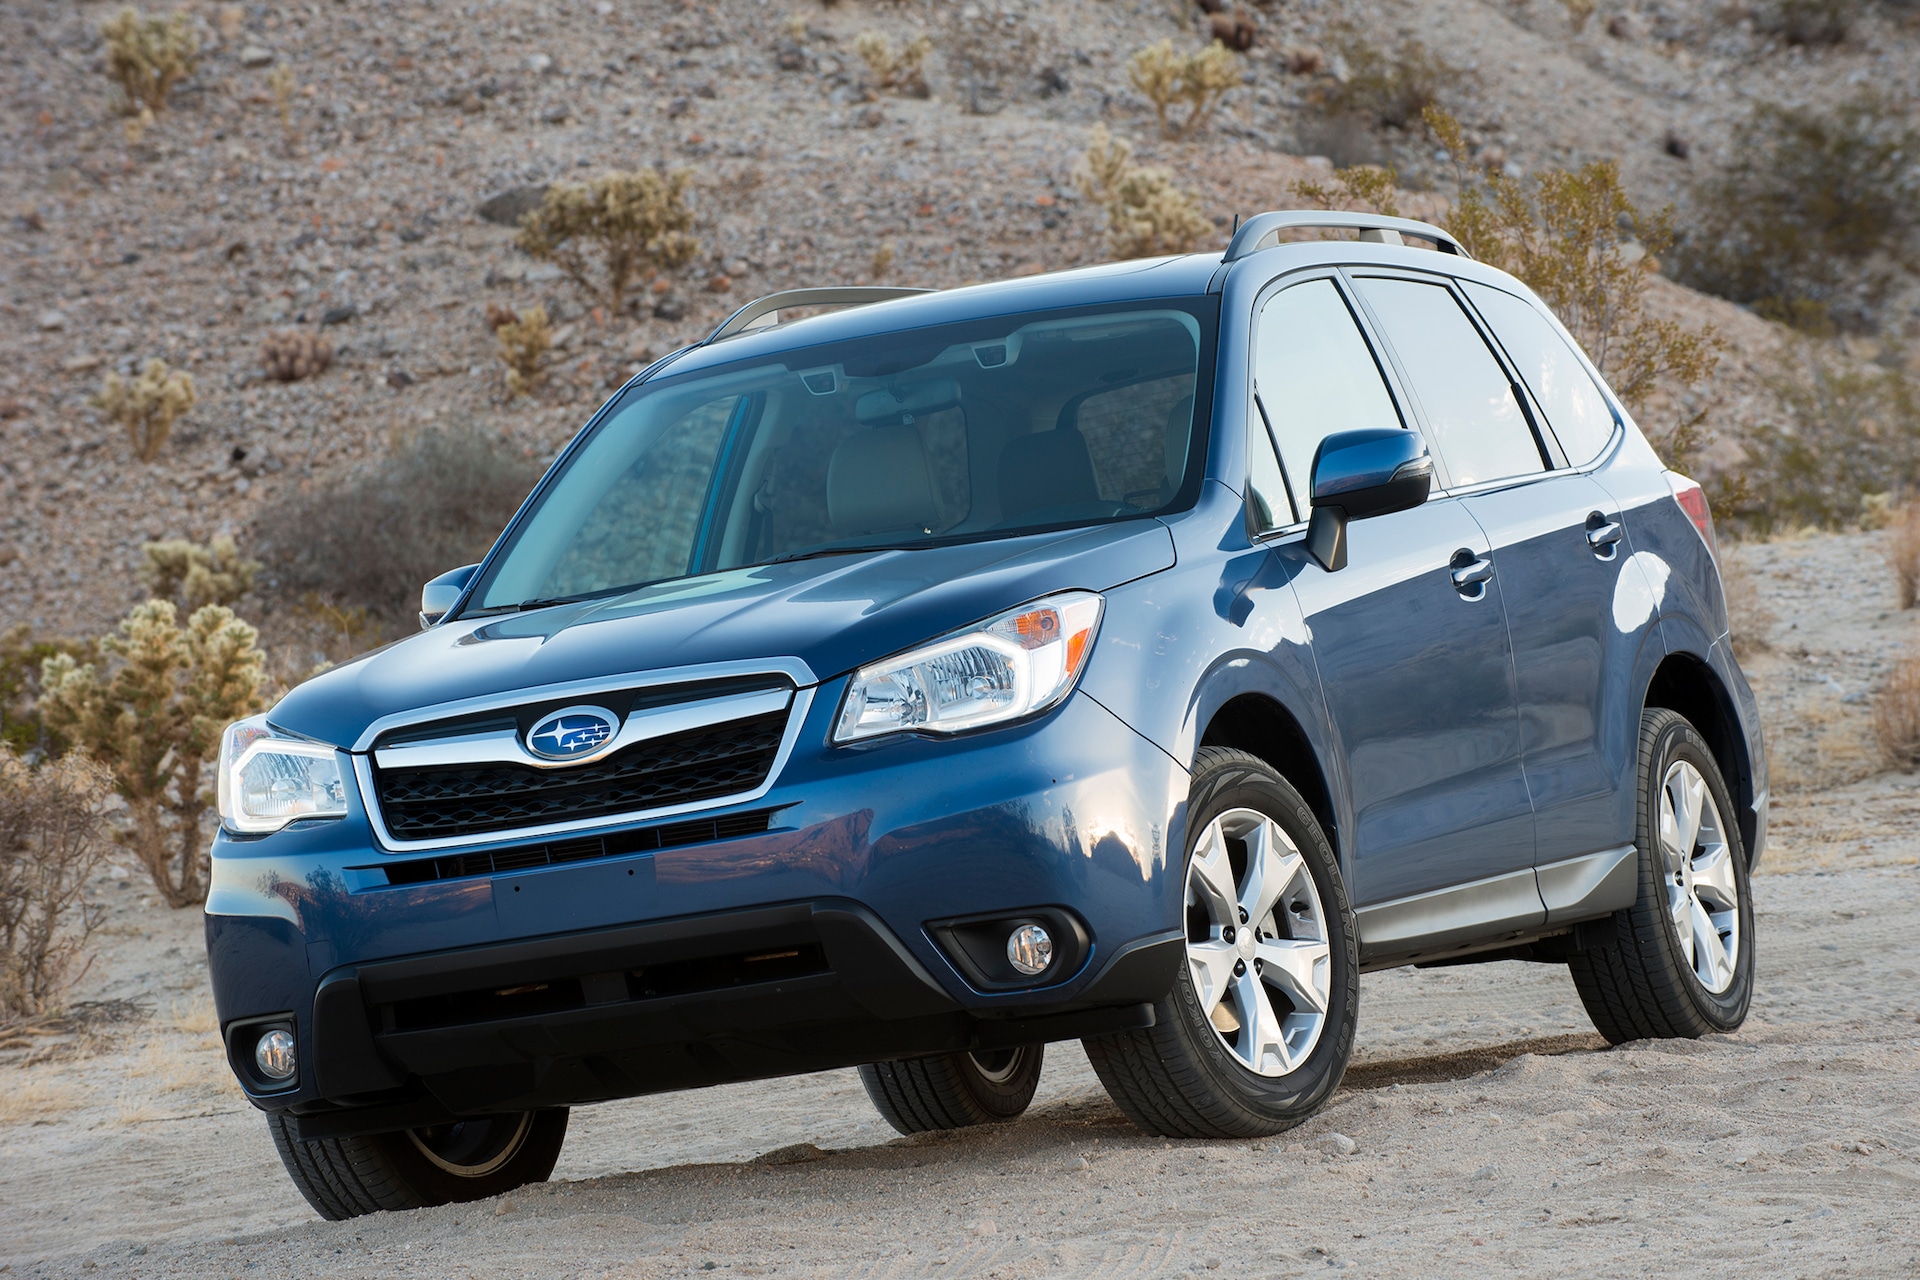 2015 Subaru Forester Priced at $23,045 With More Standard Features